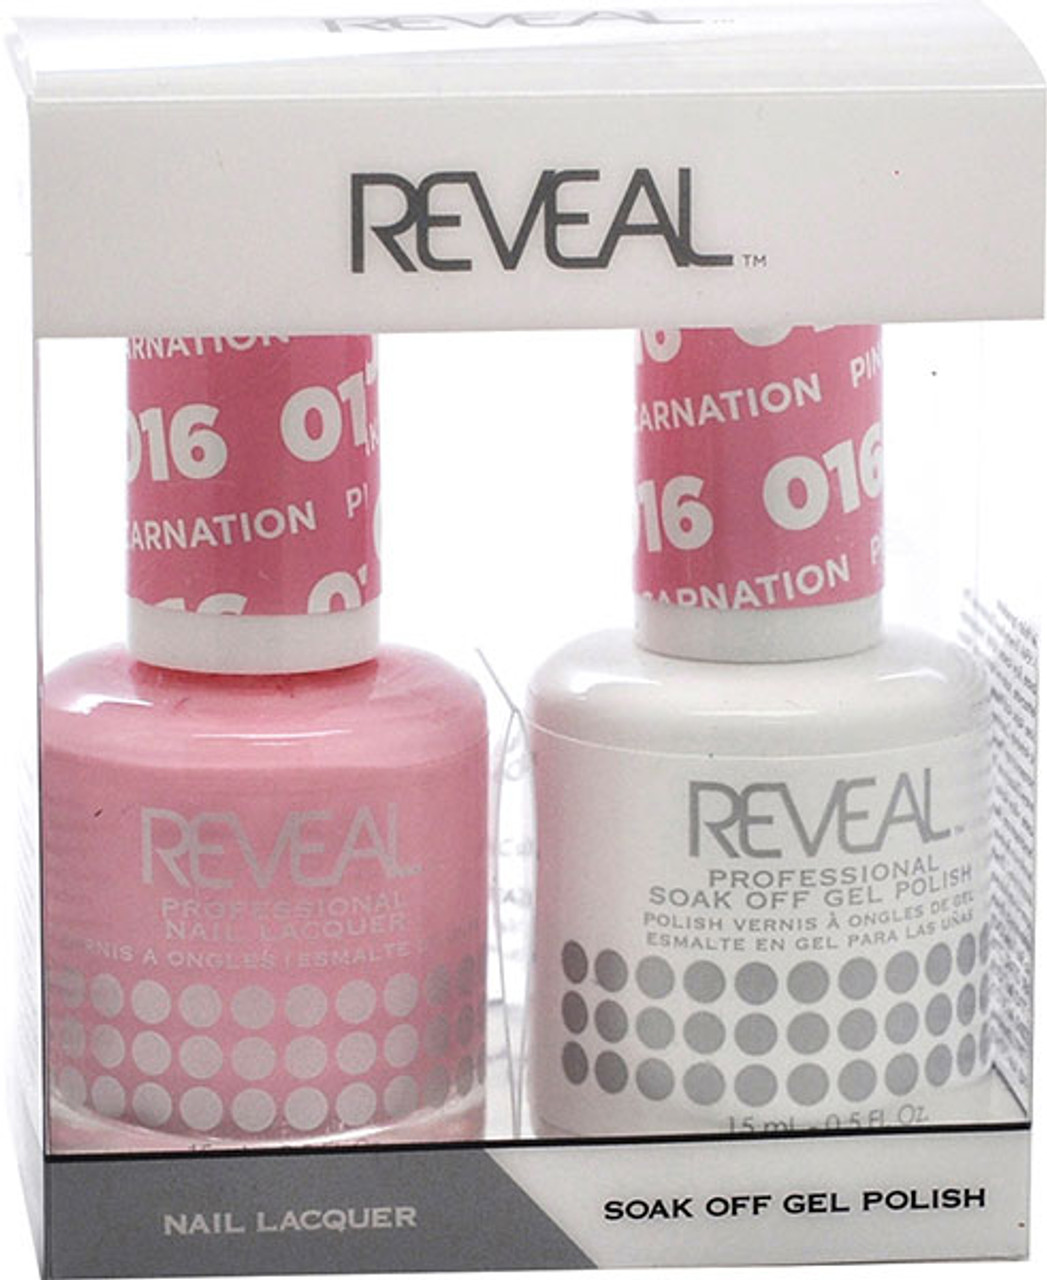 Reveal Gel Polish & Nail Lacquer Matching Duo - PINK CARNATION - .5 oz